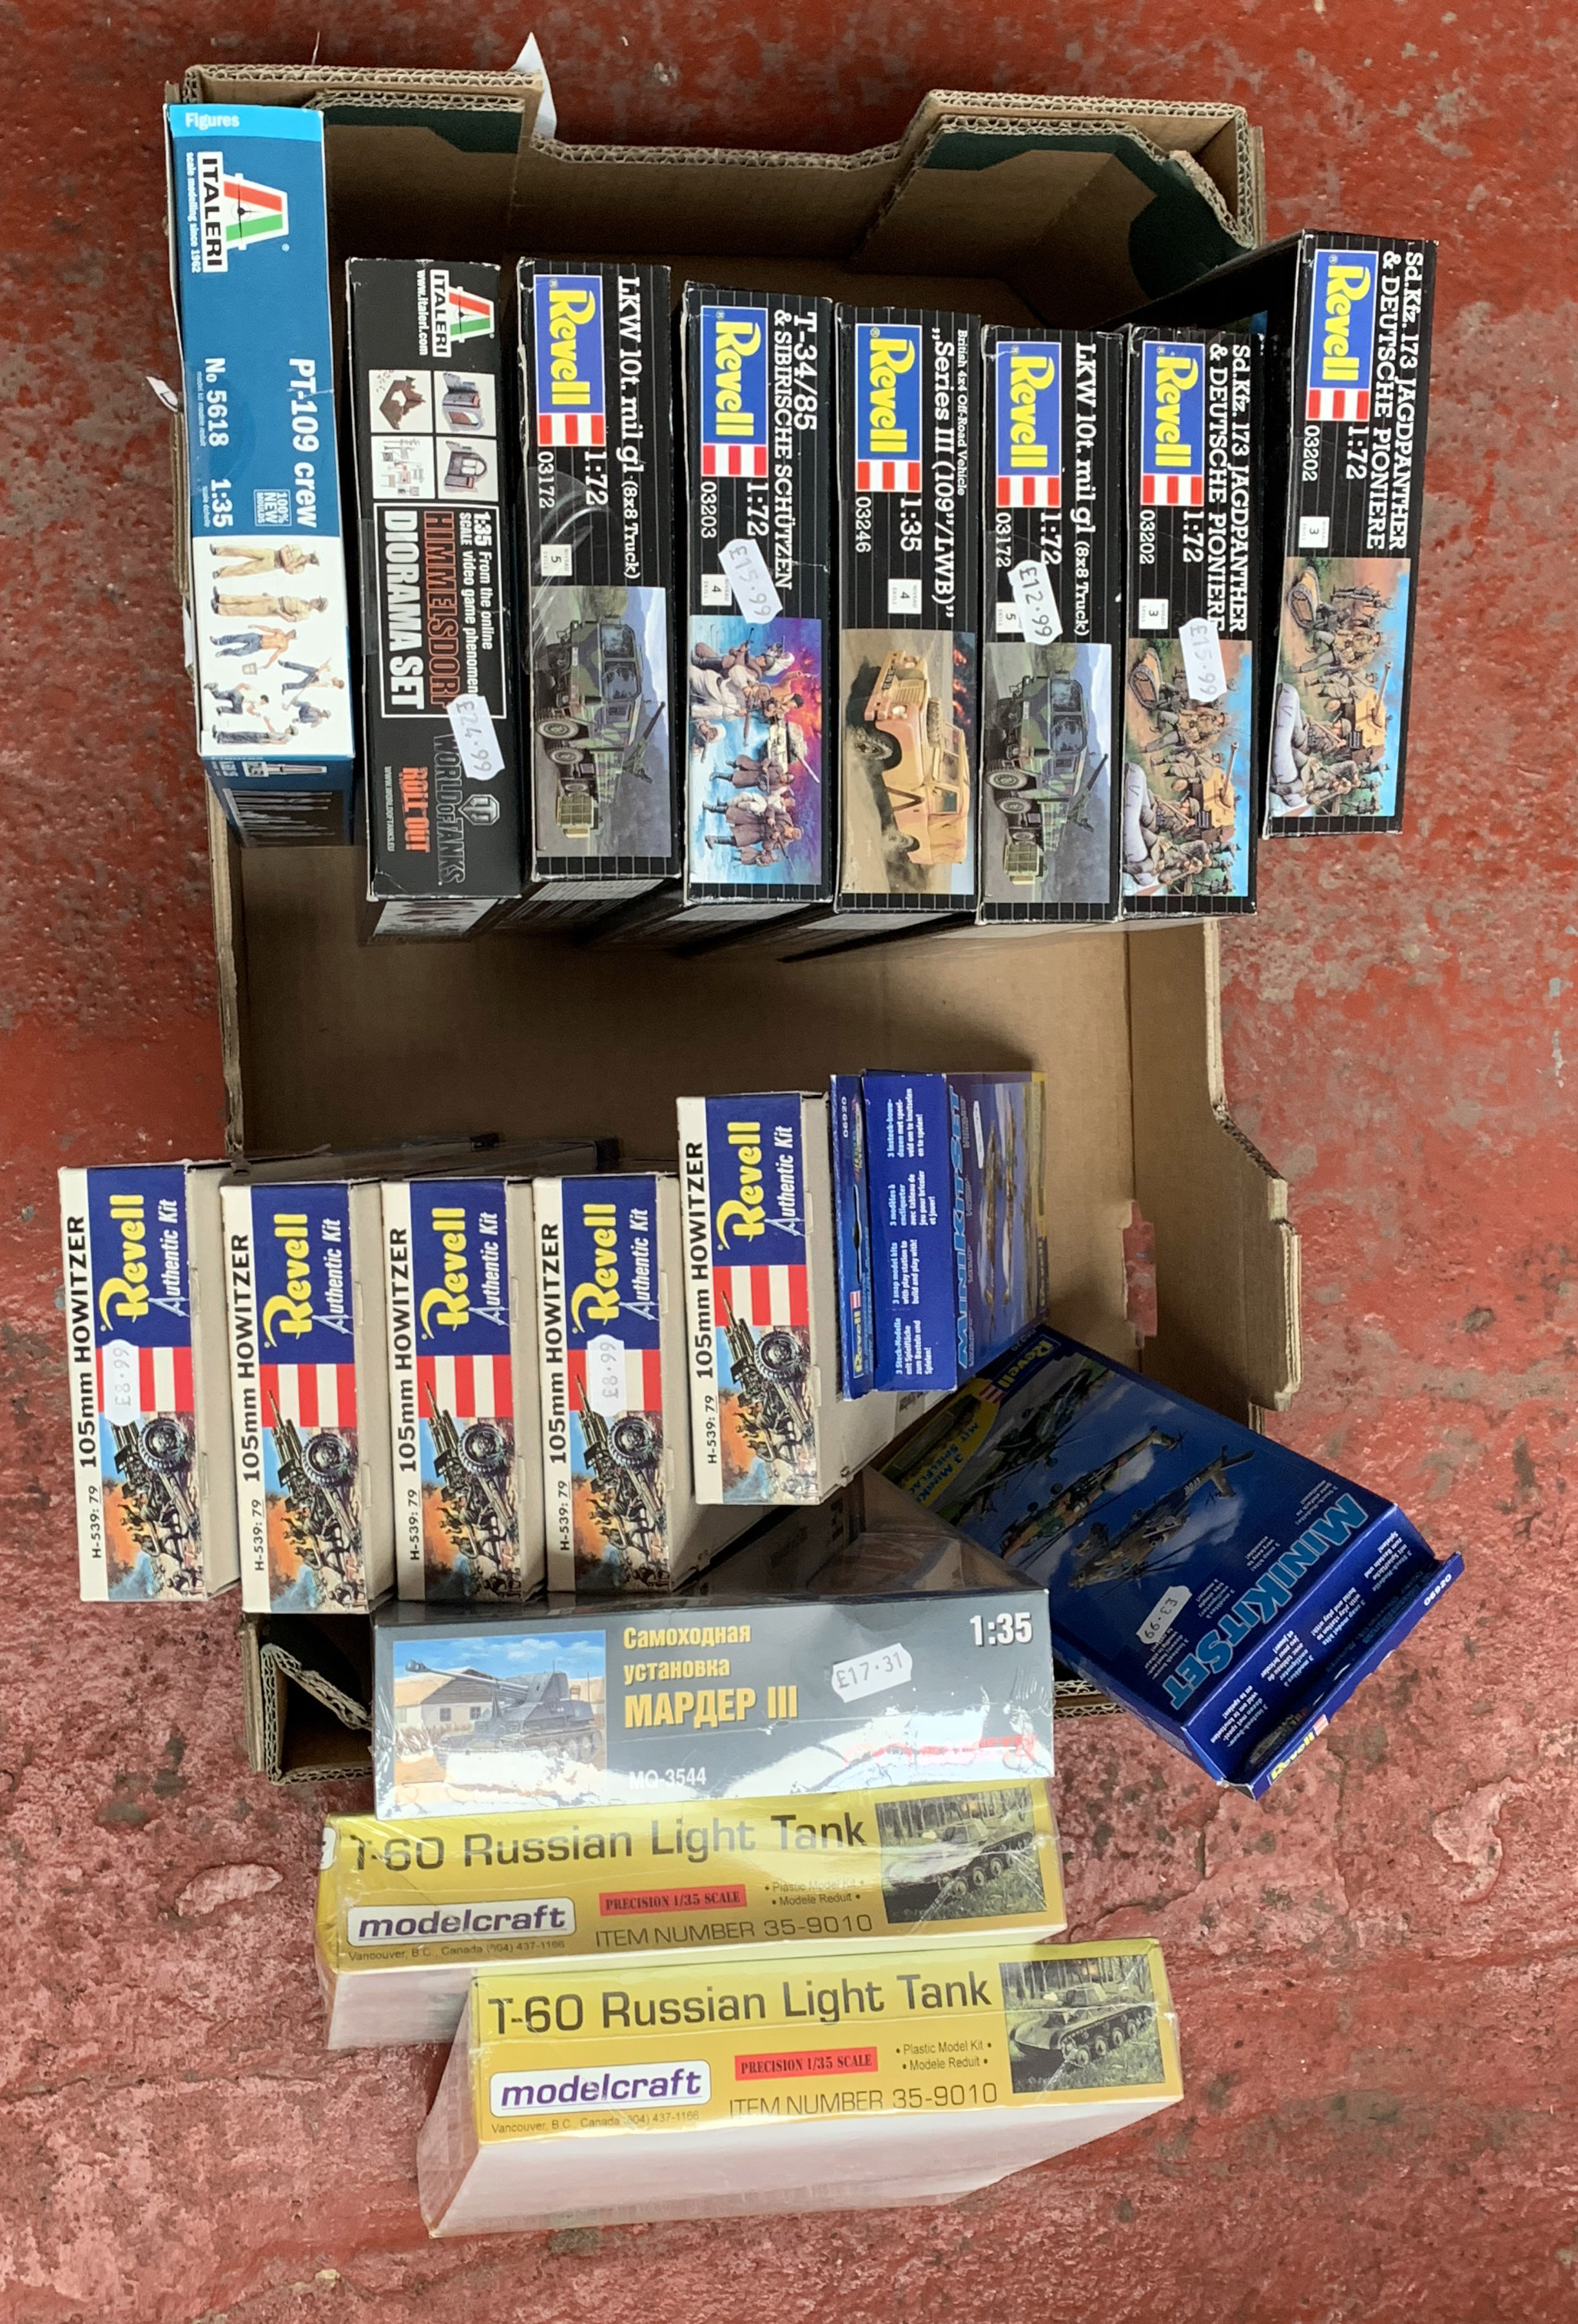 18 x assorted military related plastic model kits, by Modelcraft, Revell, Italeri and similar.